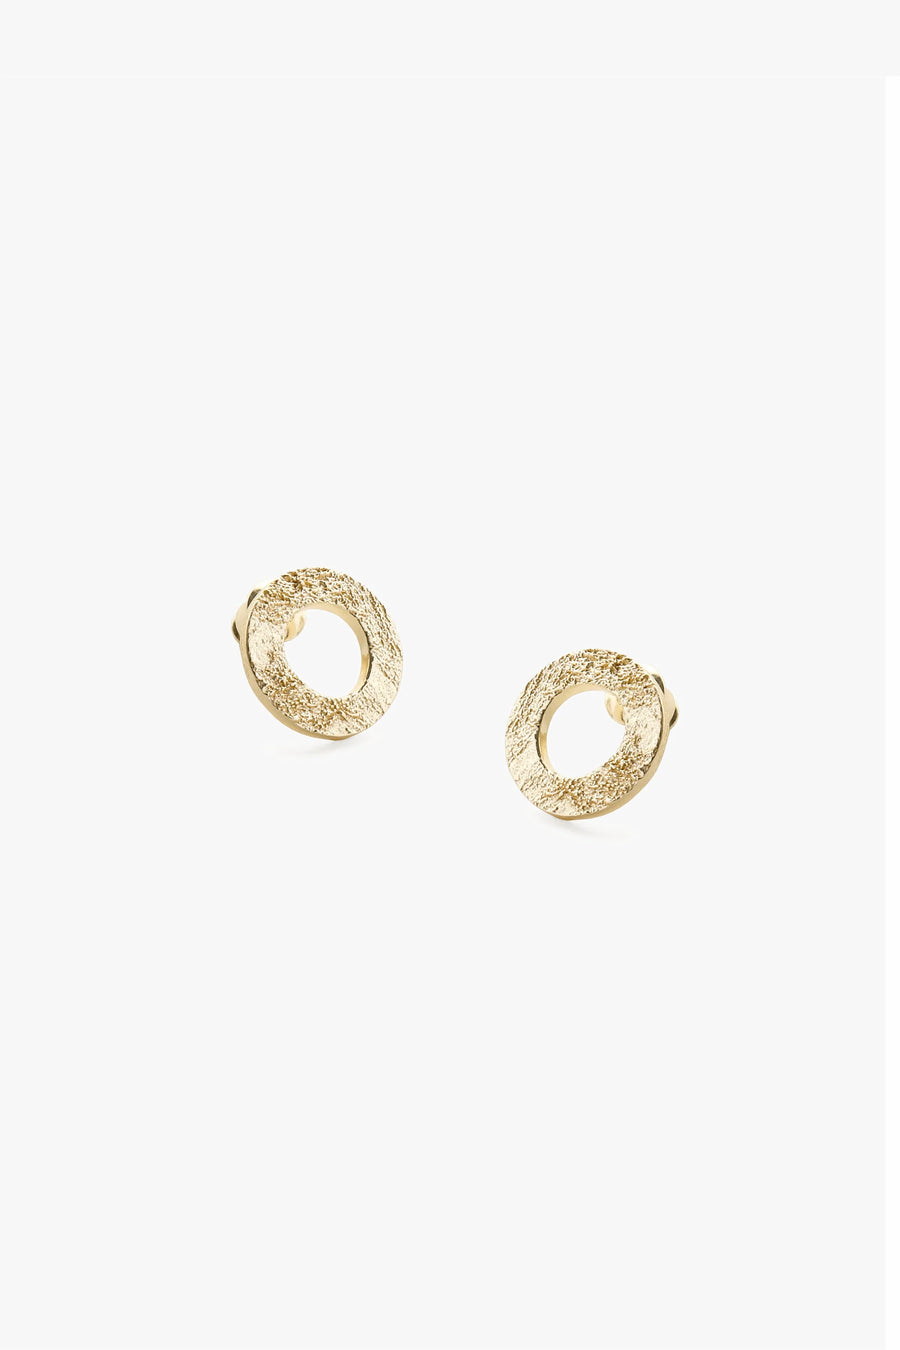 MINERAL EARRINGS GOLD